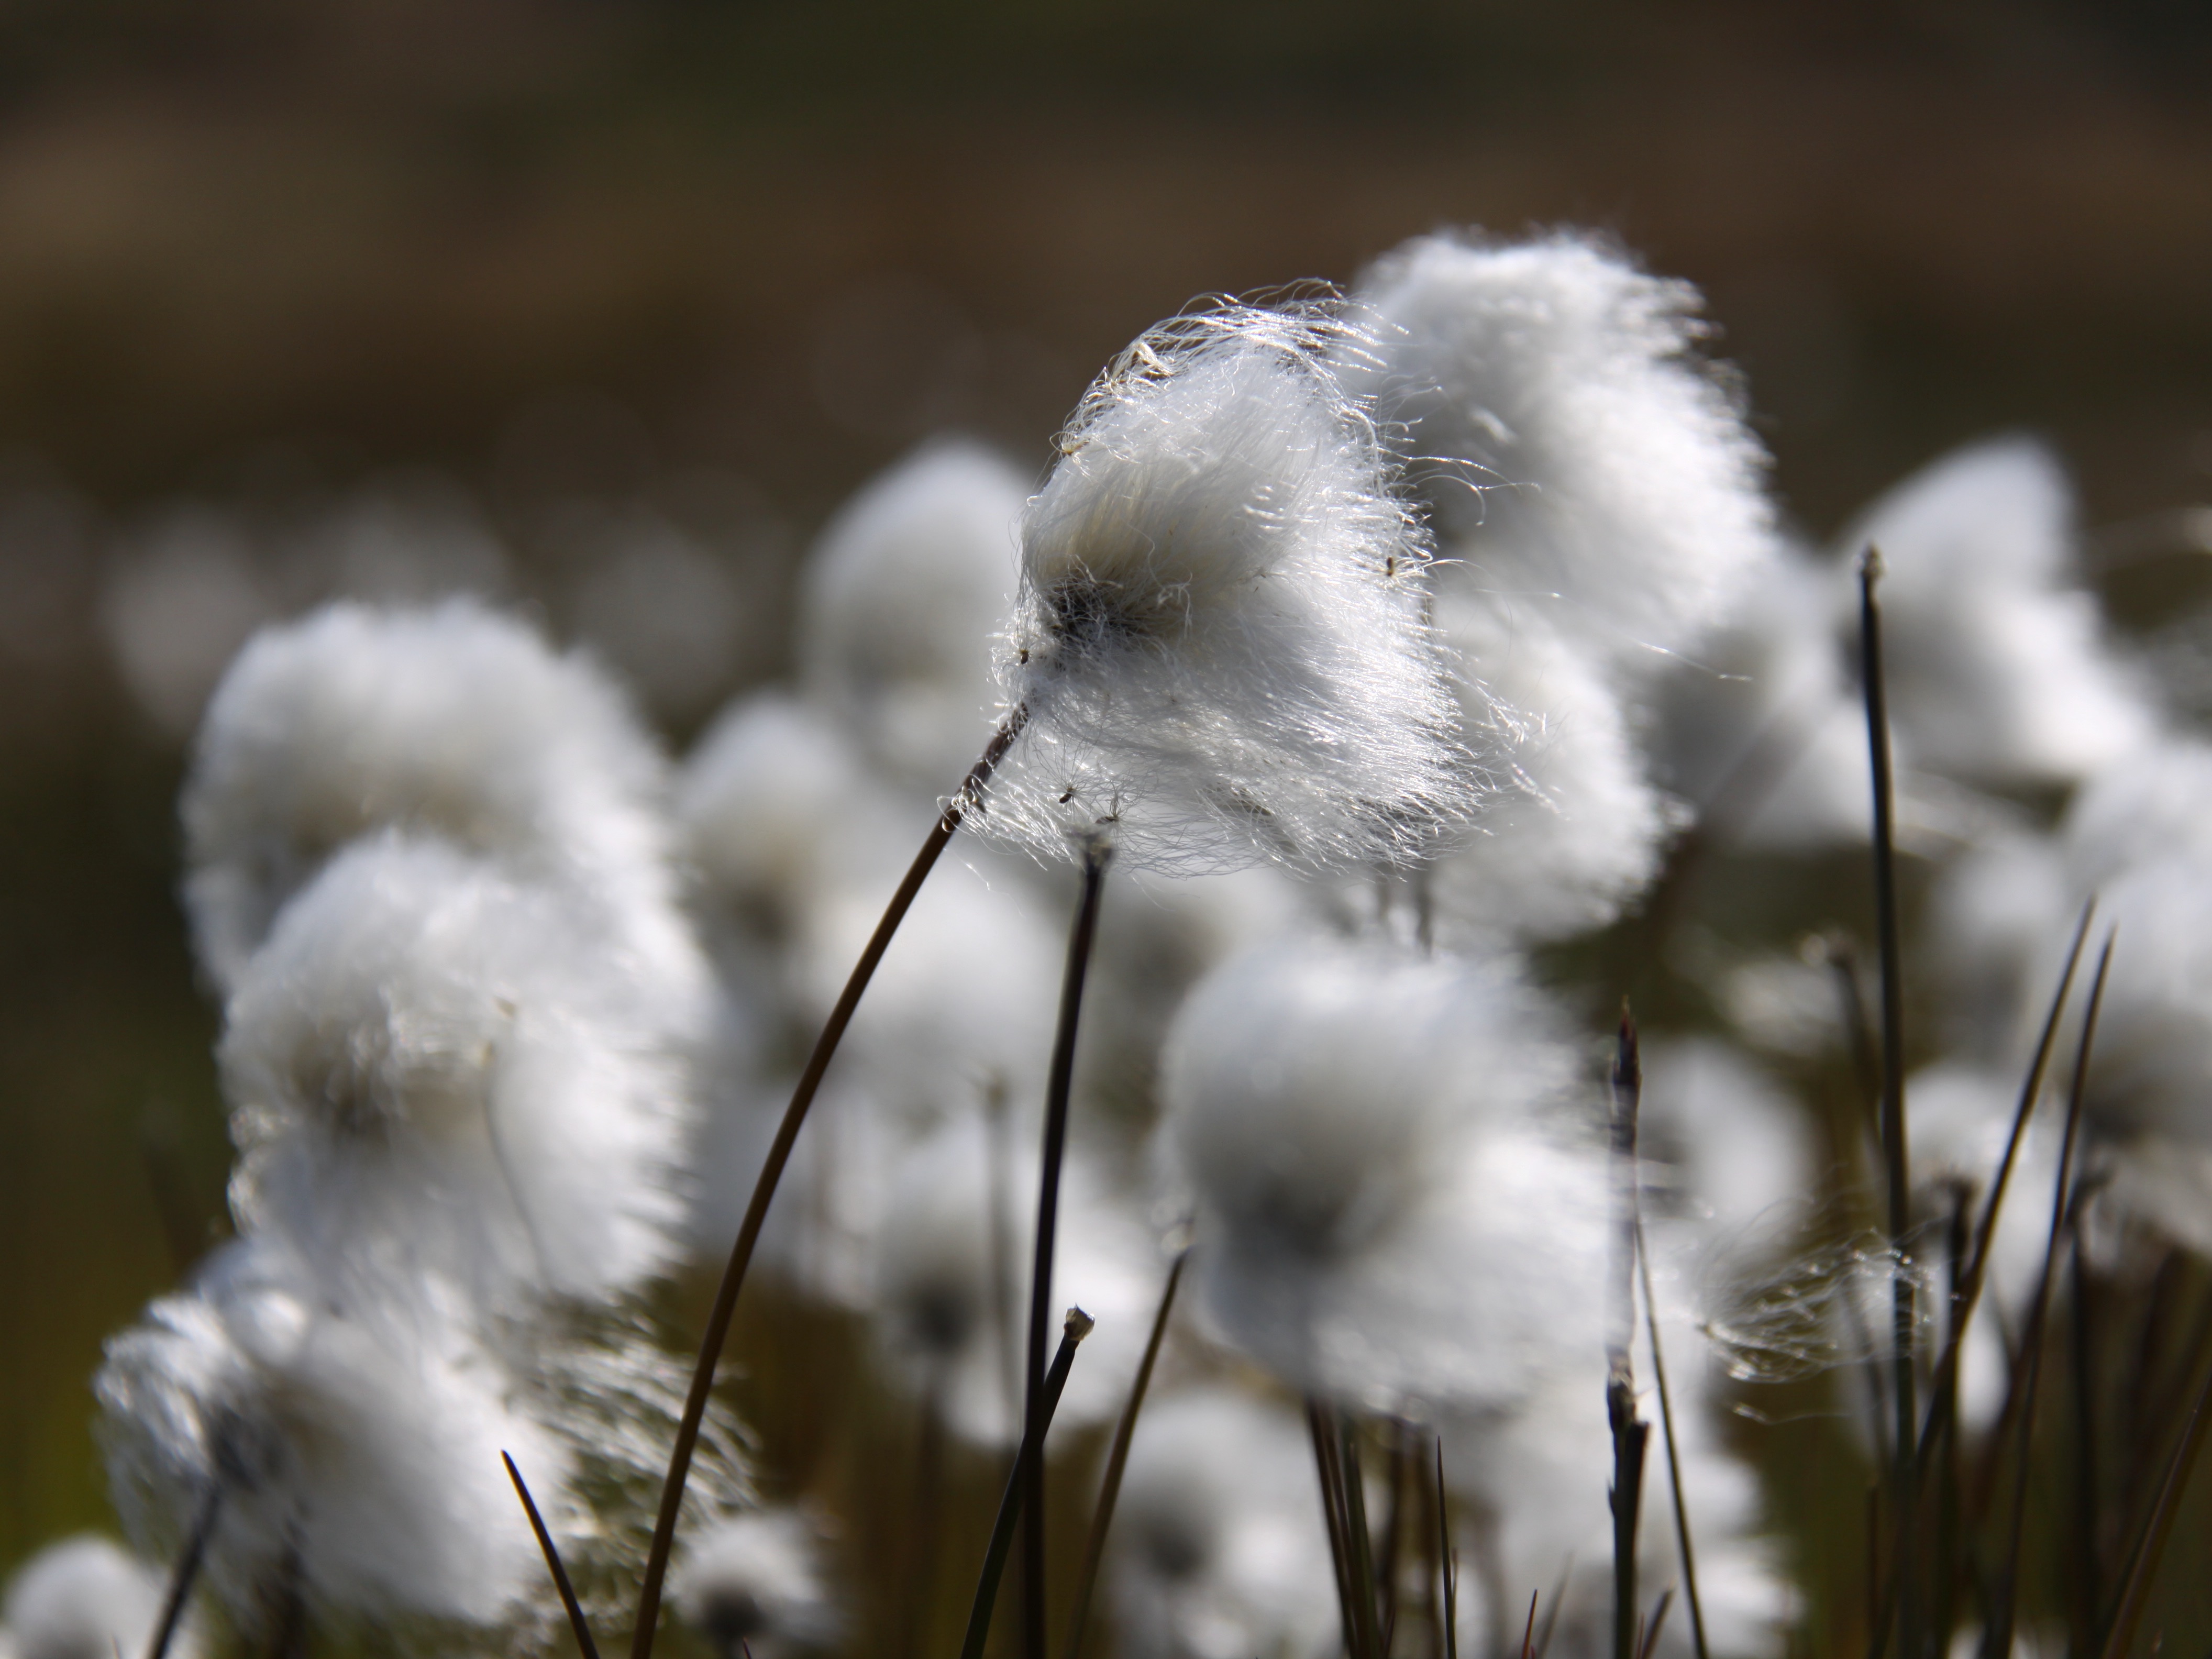 Cottongrass blows in the Greenland wind. 